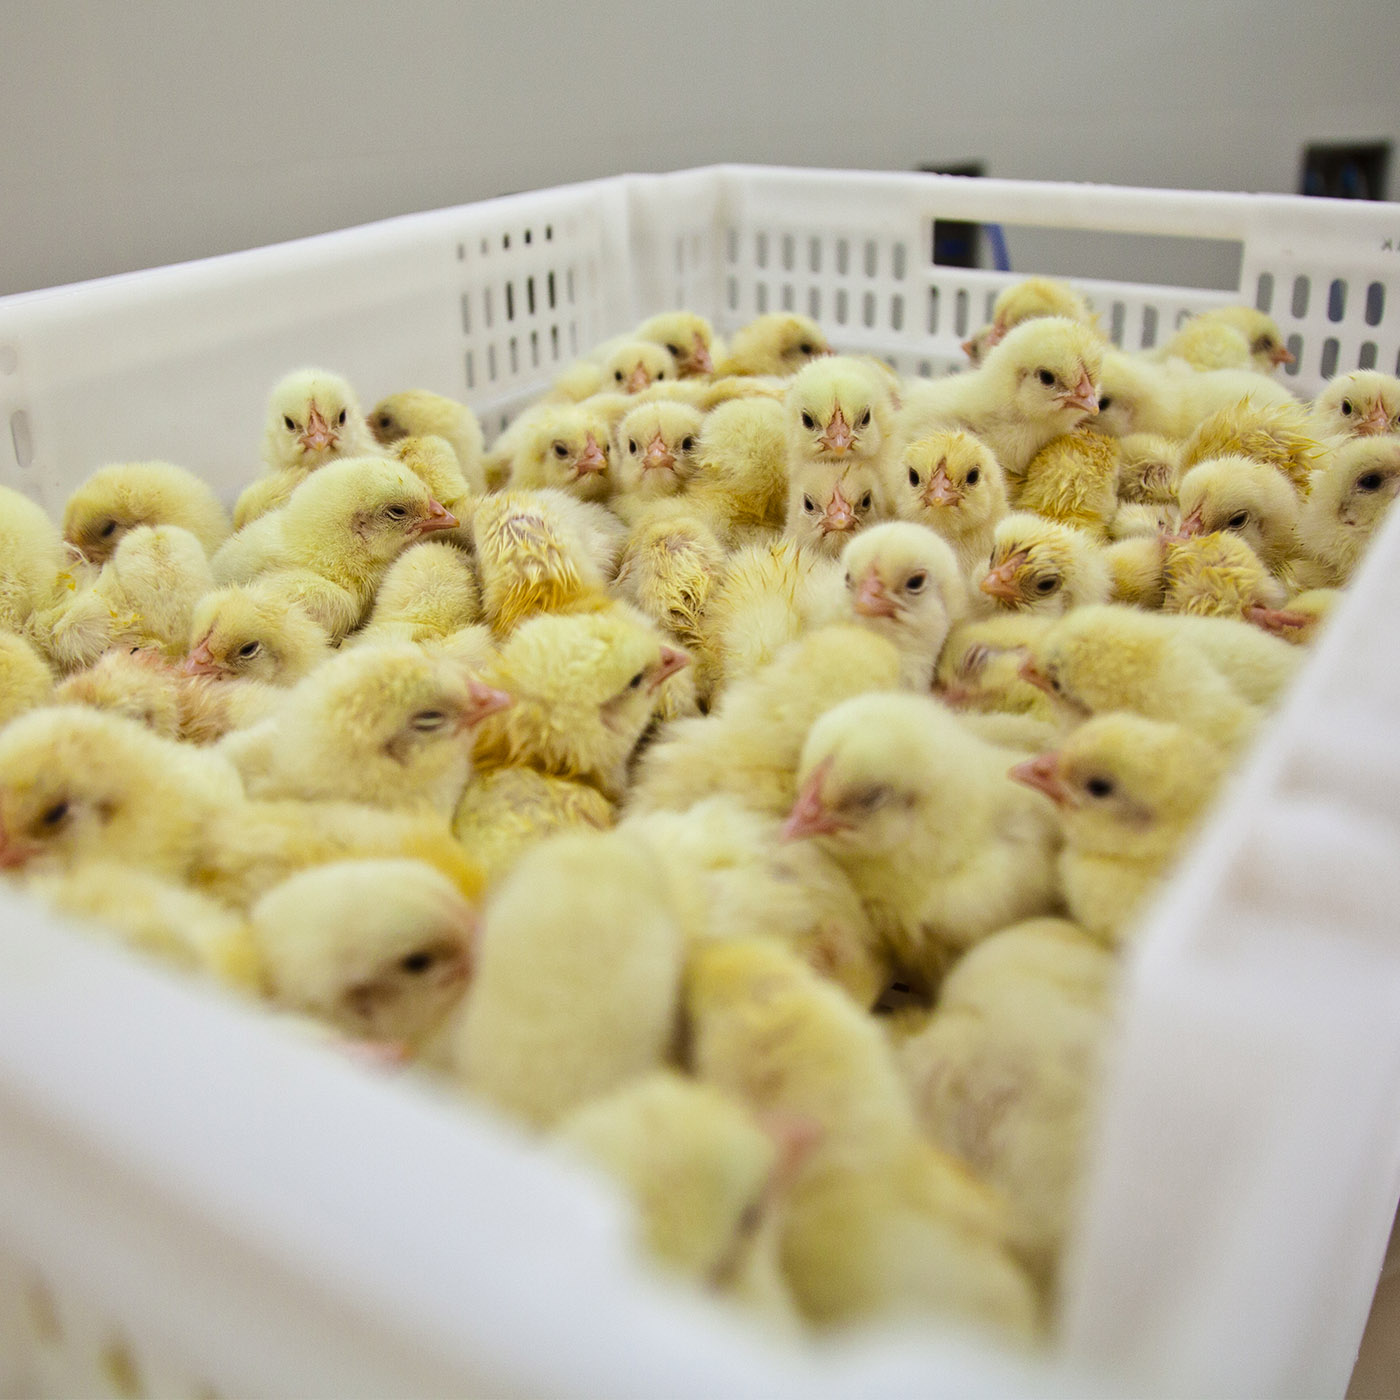 Chicks in the Egg Industry